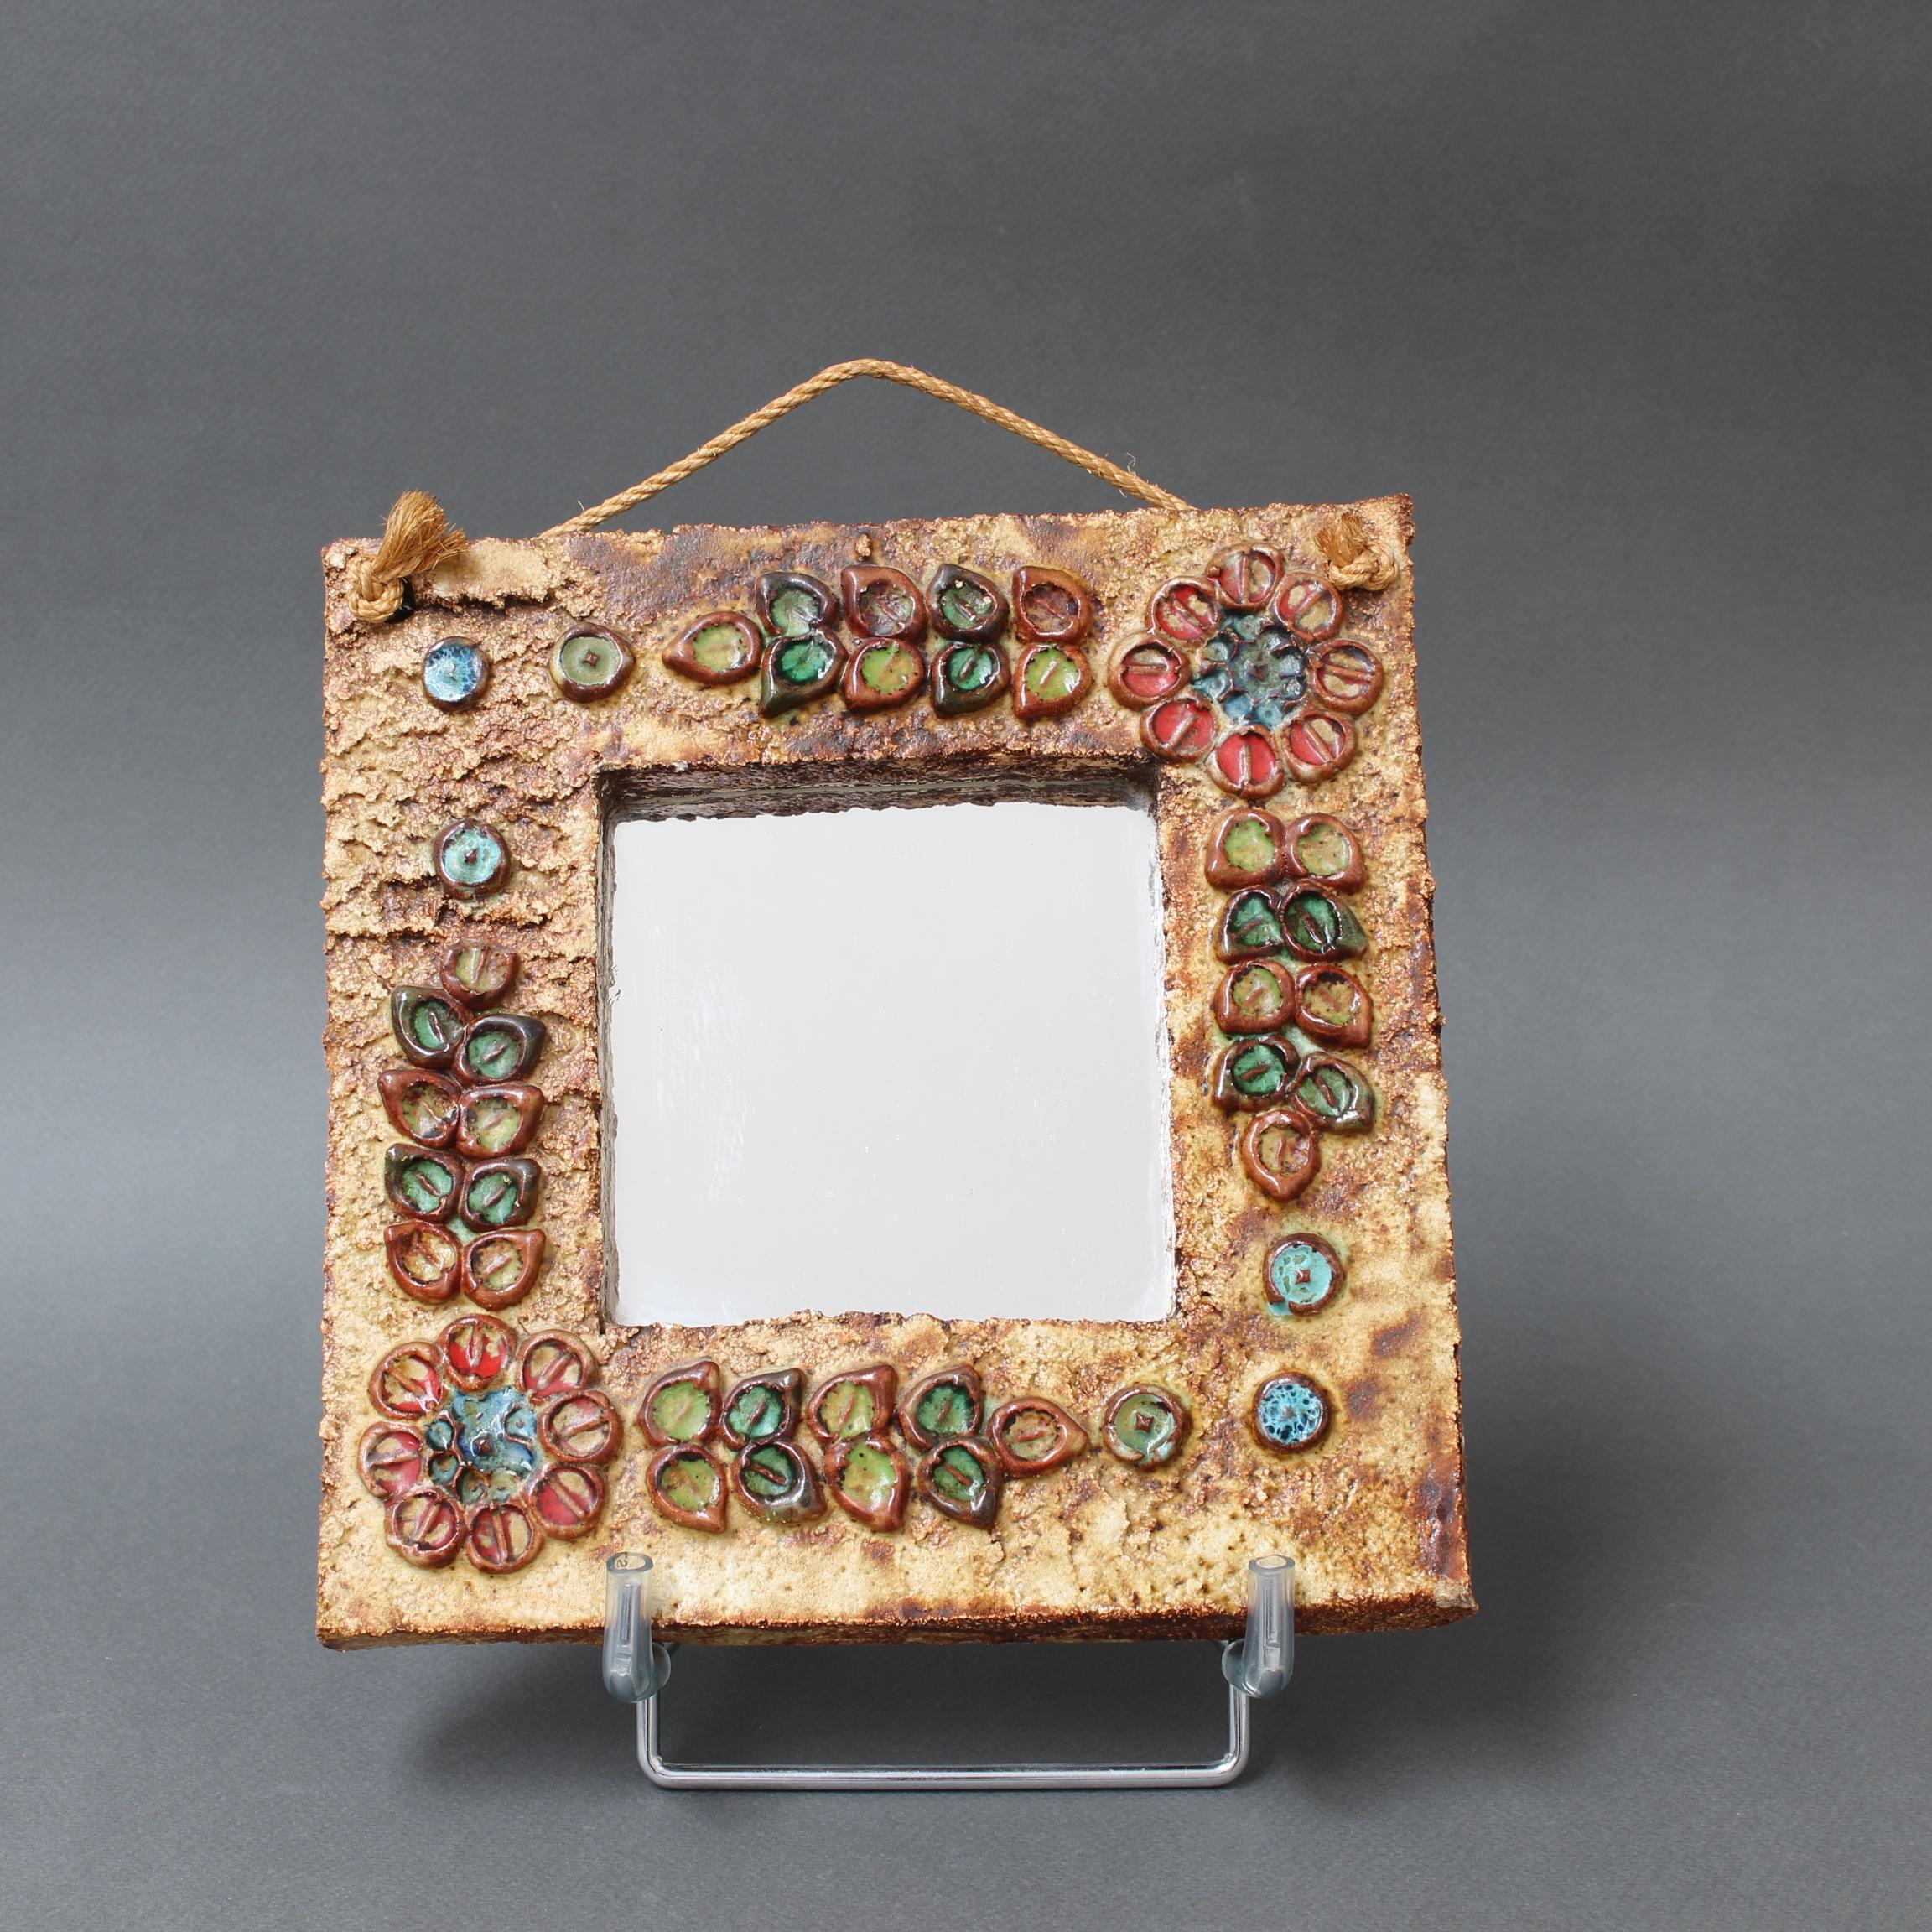 Vintage ceramic flower-motif wall mirror attributed to La Roue, Vallauris, France (circa 1960s). A charming, decorative mirror with rustic but colourful details surrounding the square mirror glass. In very good overall condition showing characterful